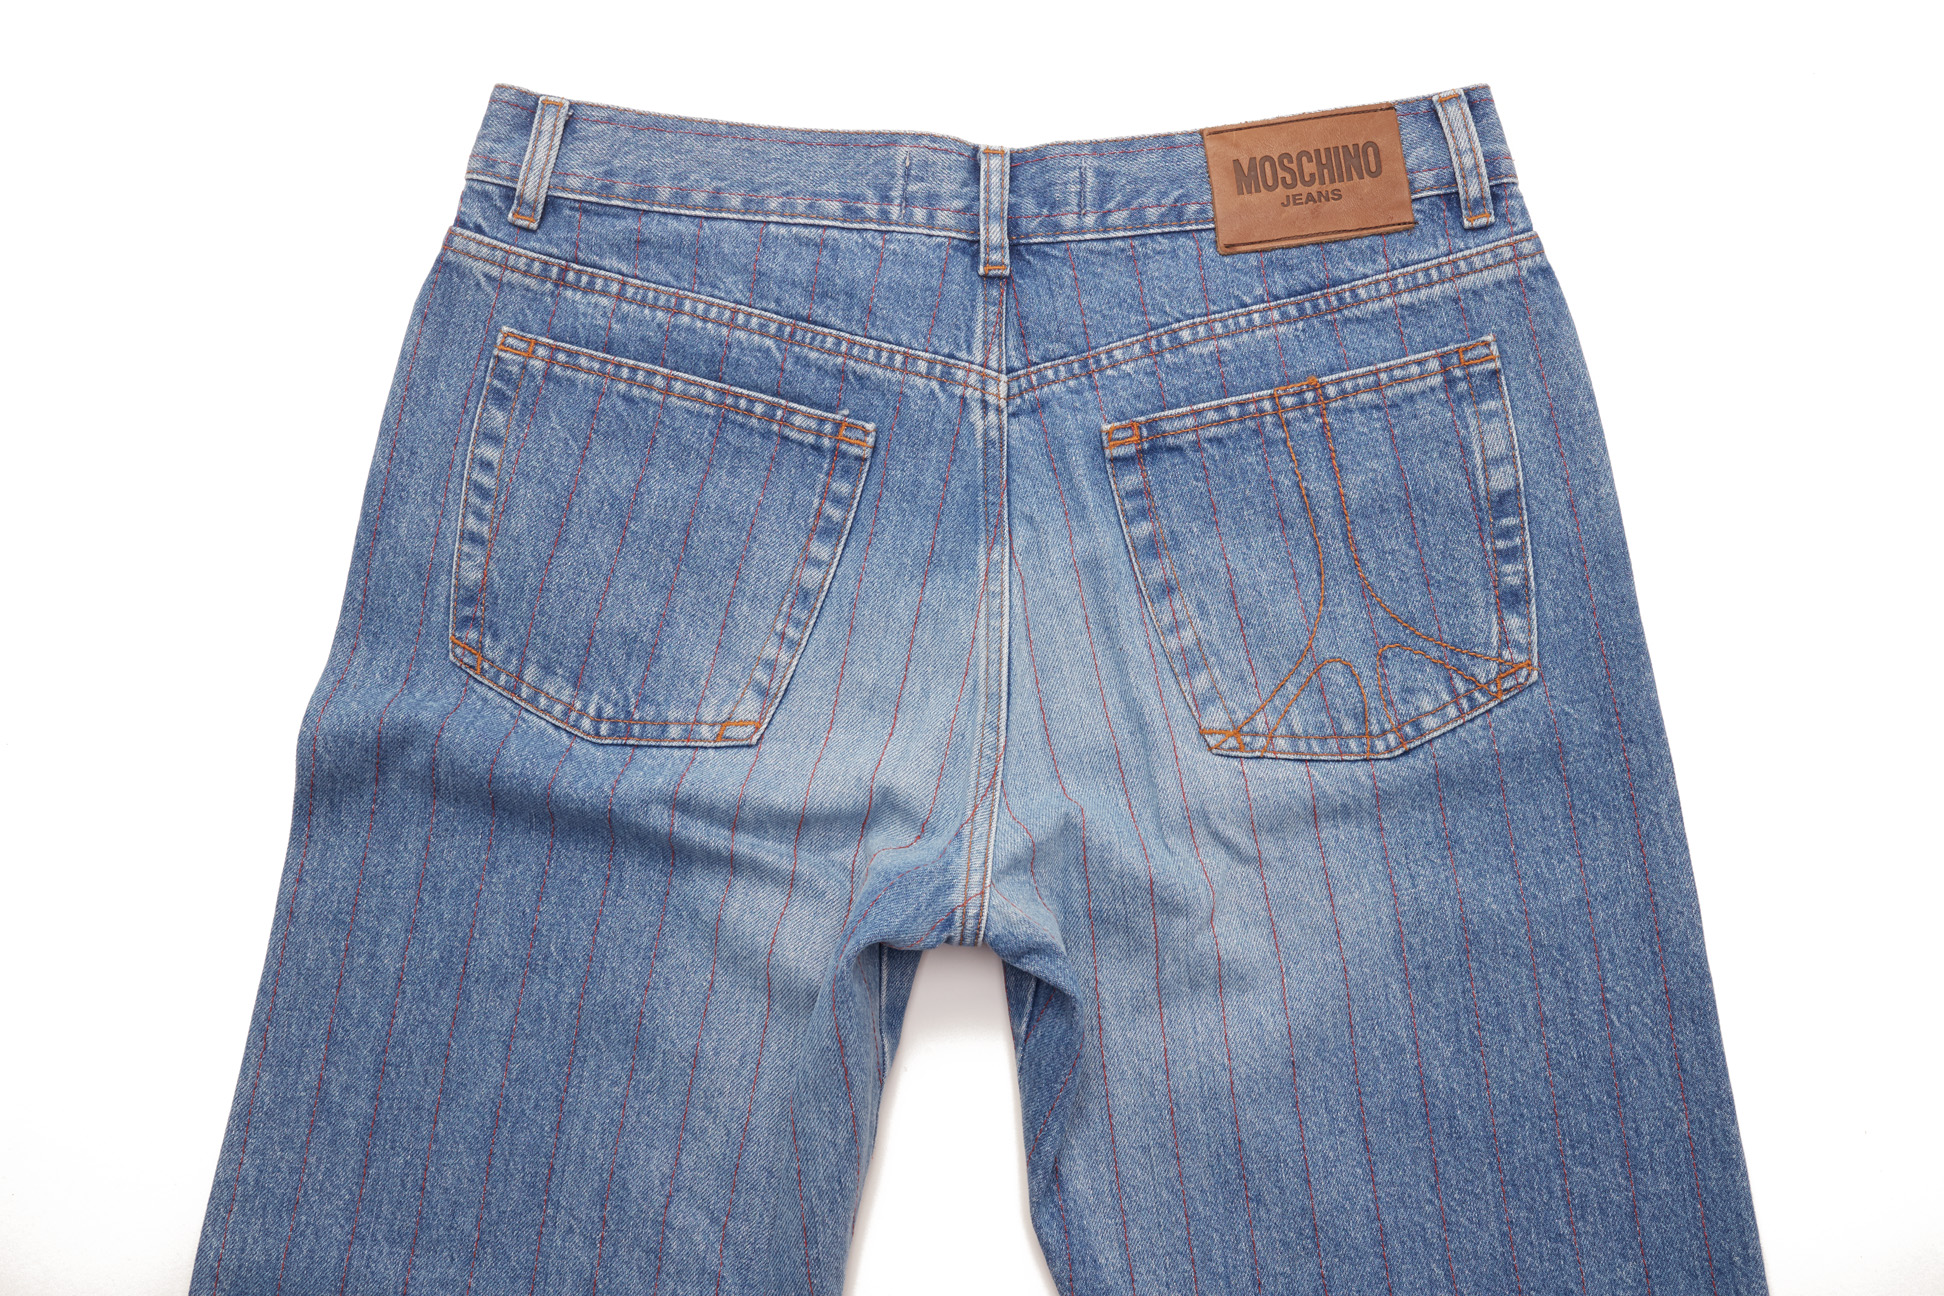 A PAIR OF MOSCHINO DENIM PINSTRIPE JEANS - Image 3 of 3